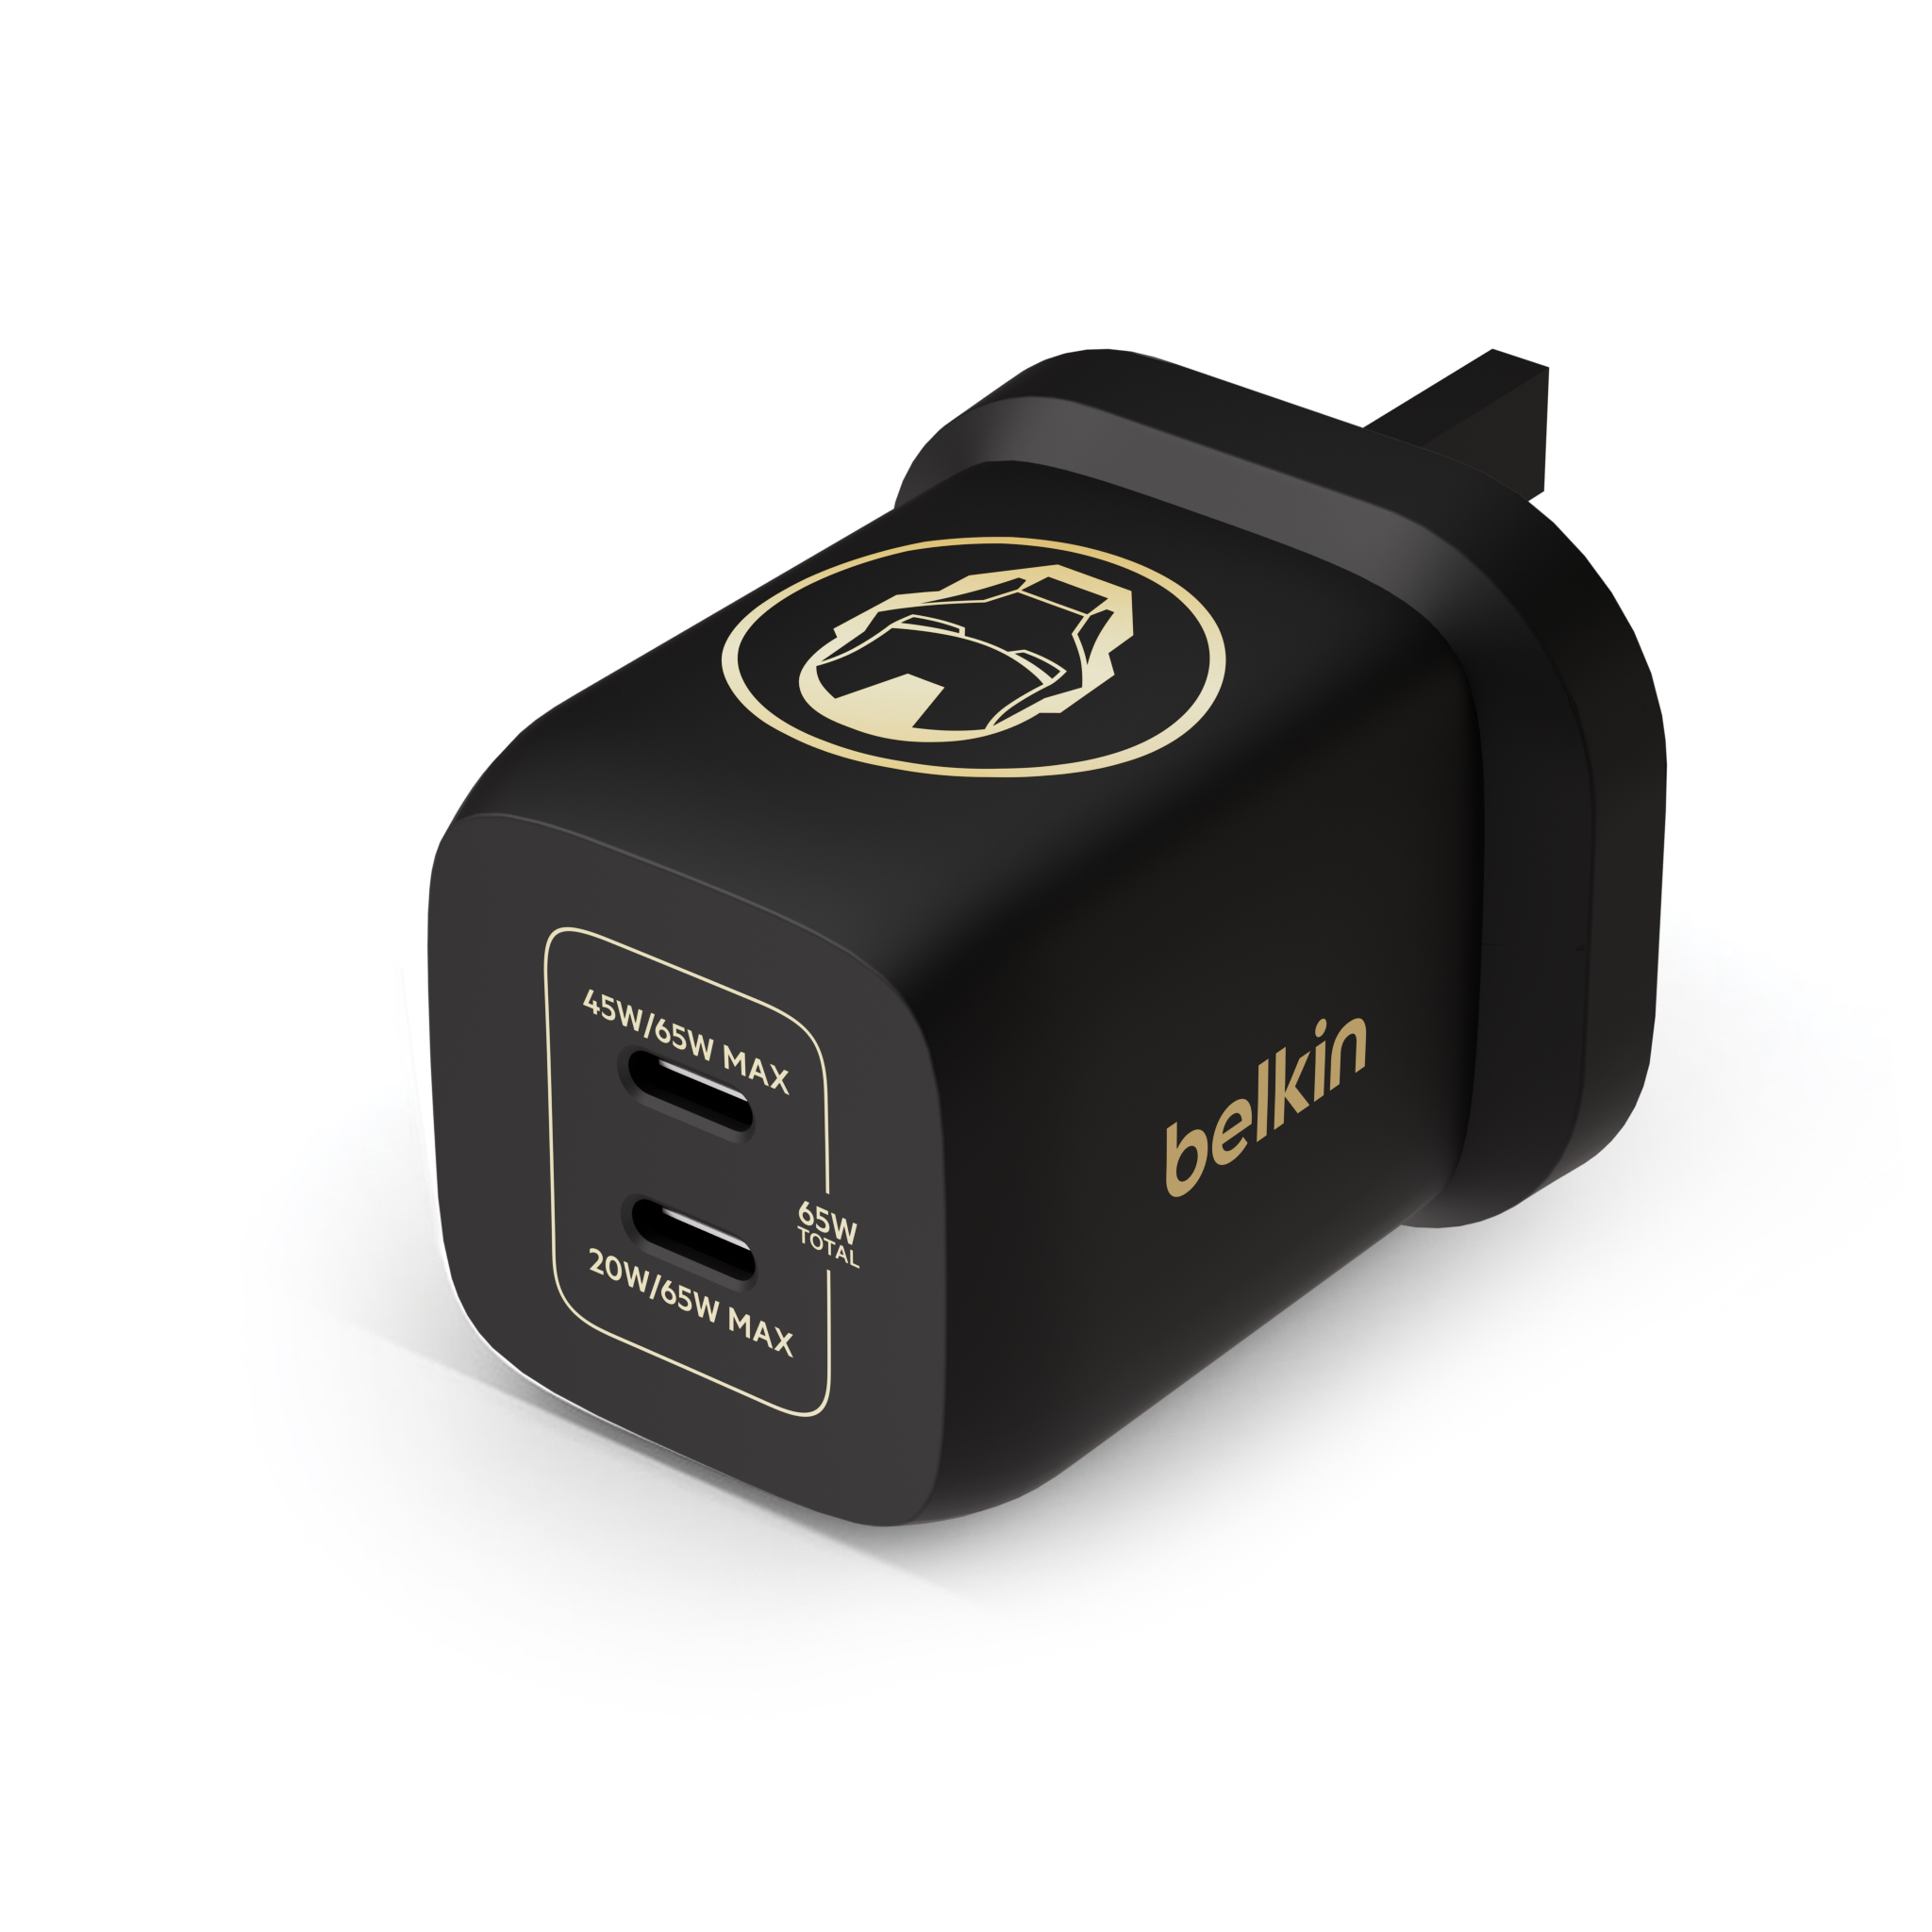 Belkin - BoostCharge Pro Dual USB-C GaN Wall Charger with PPS 65W (Disney Collection, Disney 100th Anniversary) (Iron Man)